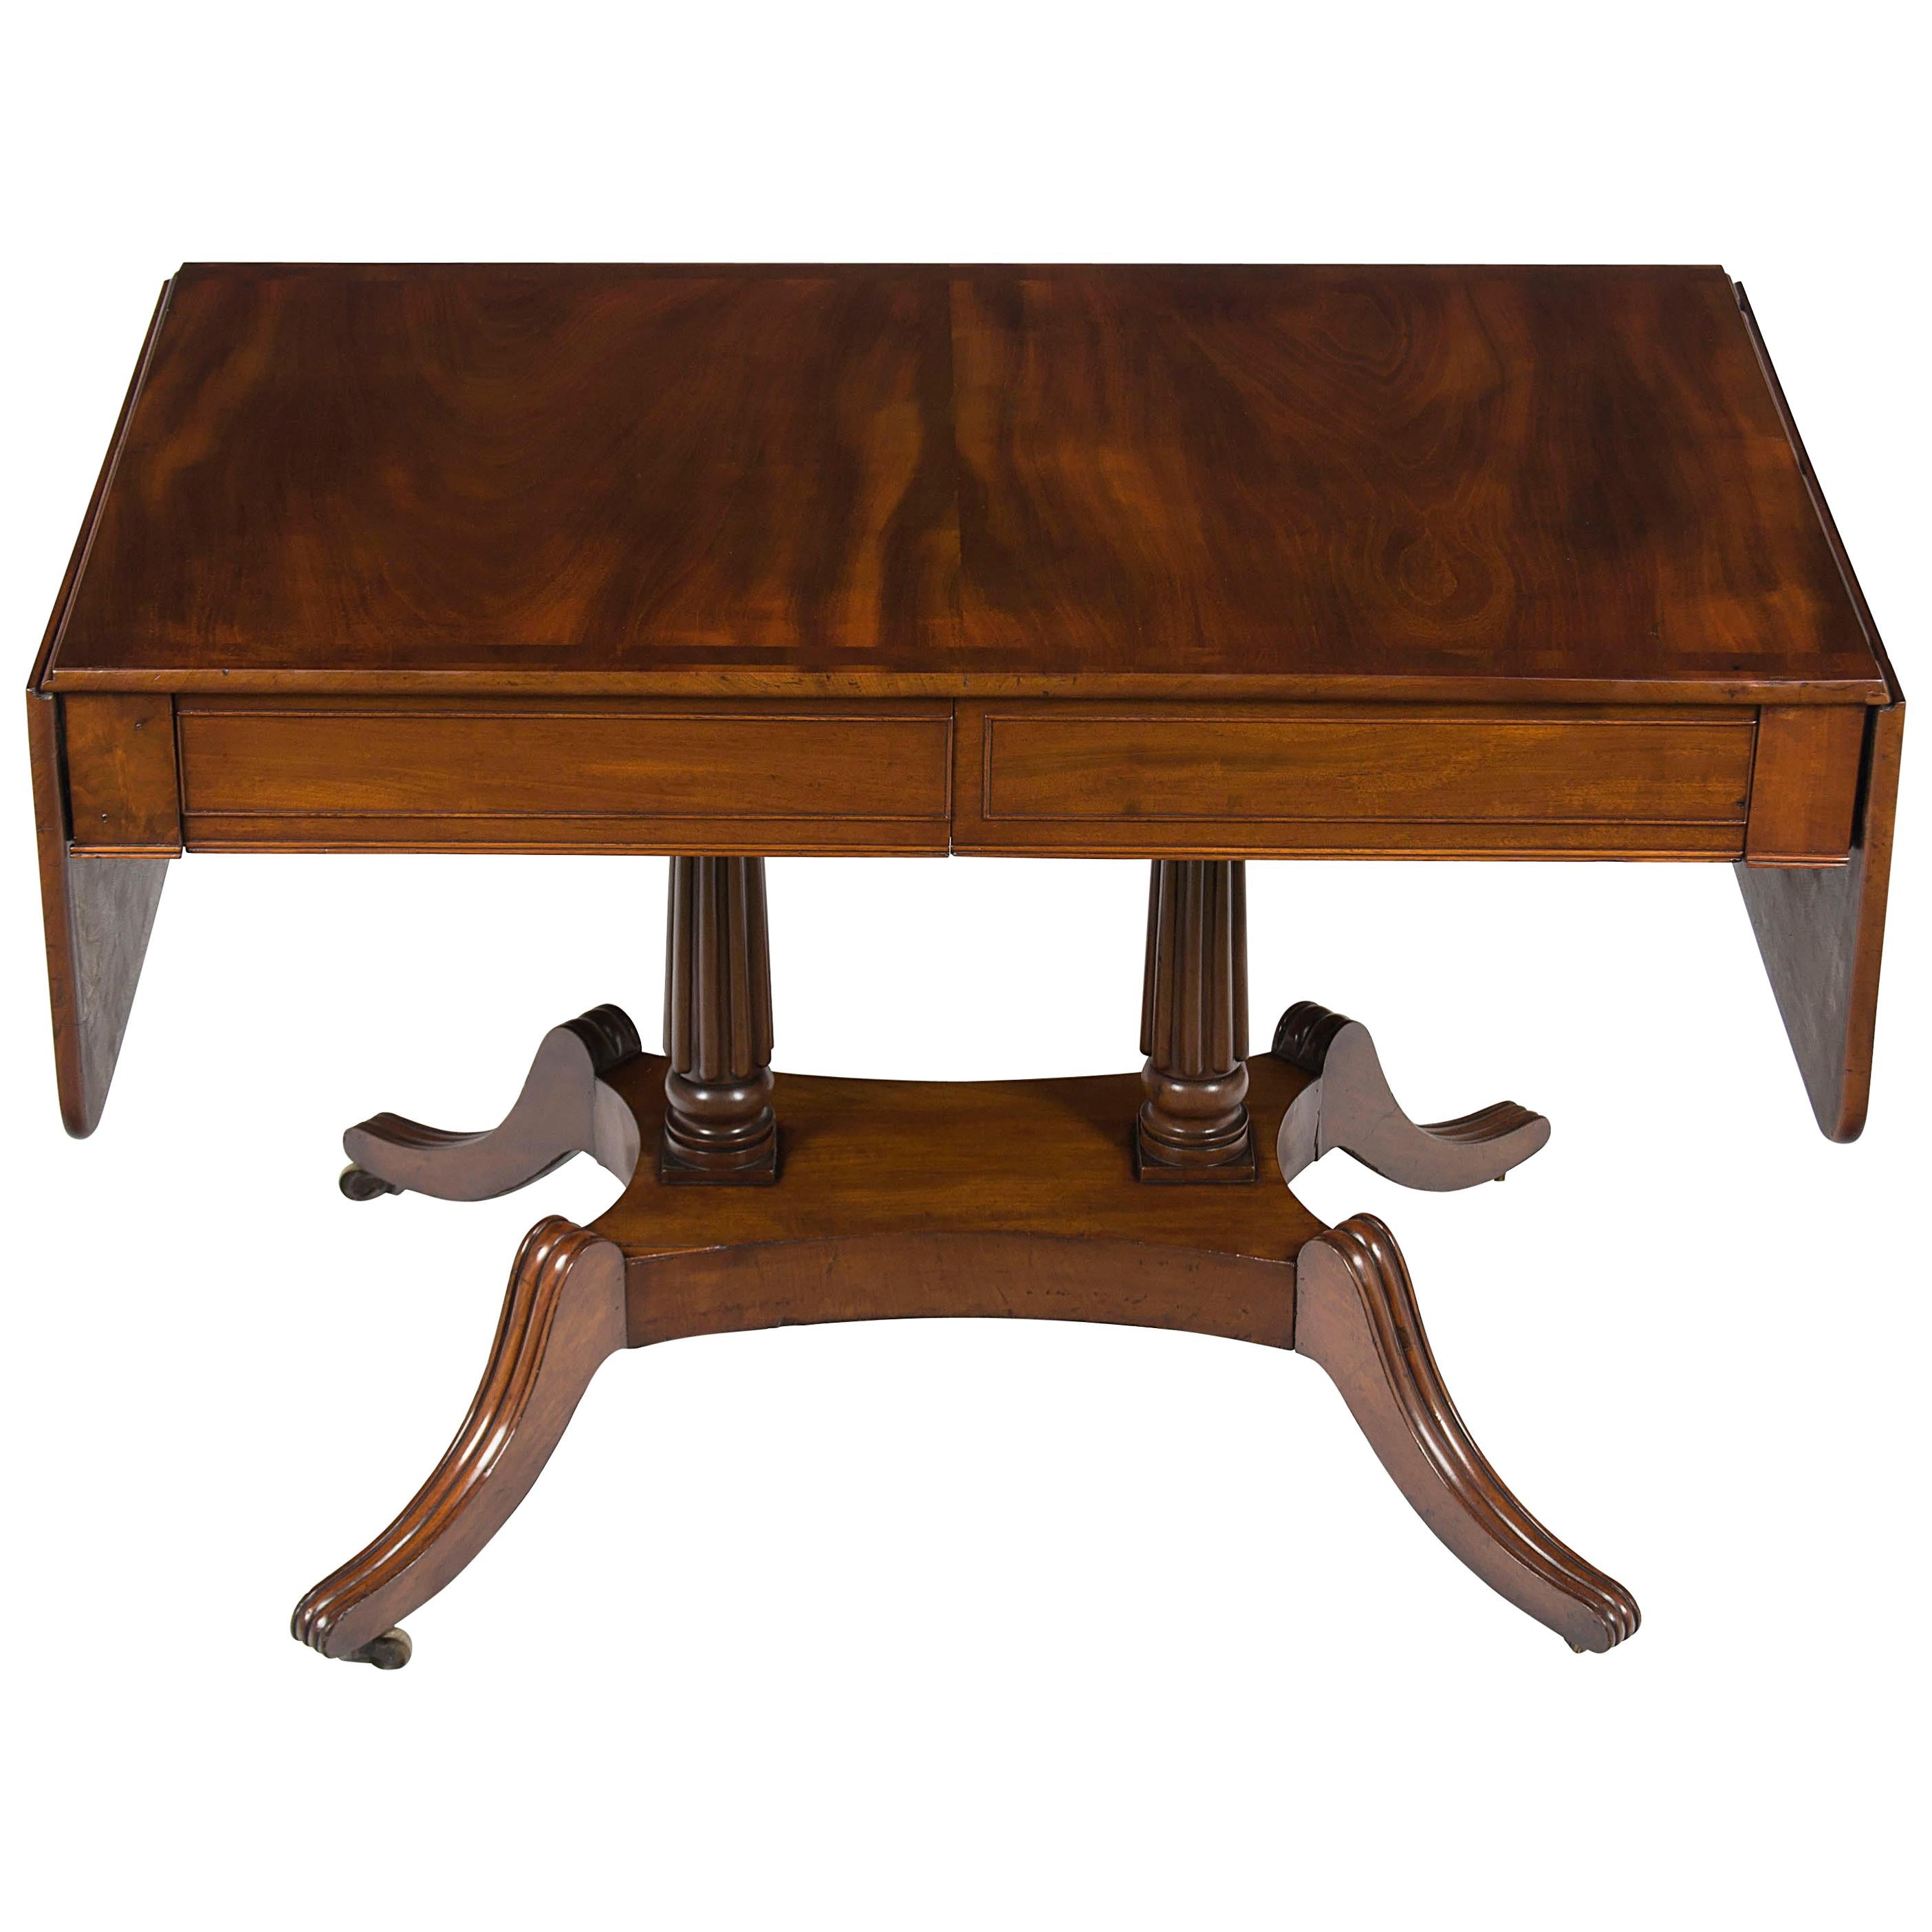 Victorian Period Mahogany Drop-Leaf Writing Desk Library Sofa Table For Sale